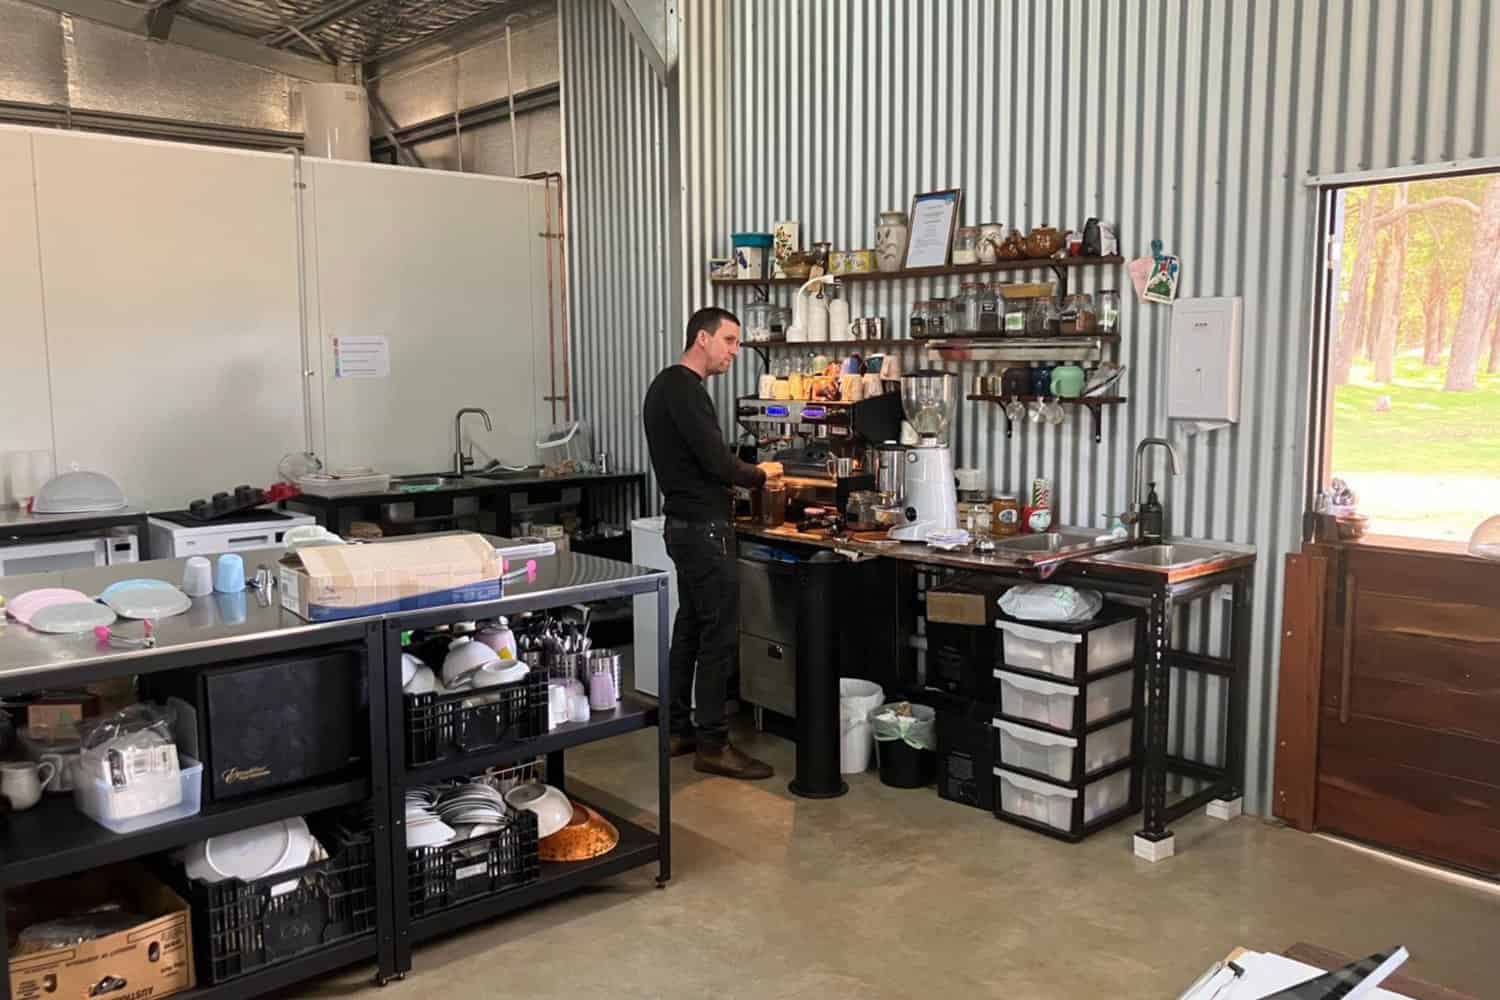 A skilled barista preparing the best coffee in Margaret River. The image shows a man behind the counter of a cafe, operating a coffee machine with expertise and precision. The aroma of freshly brewed coffee fills the air as the barista creates a perfect cup of java for delighted customers